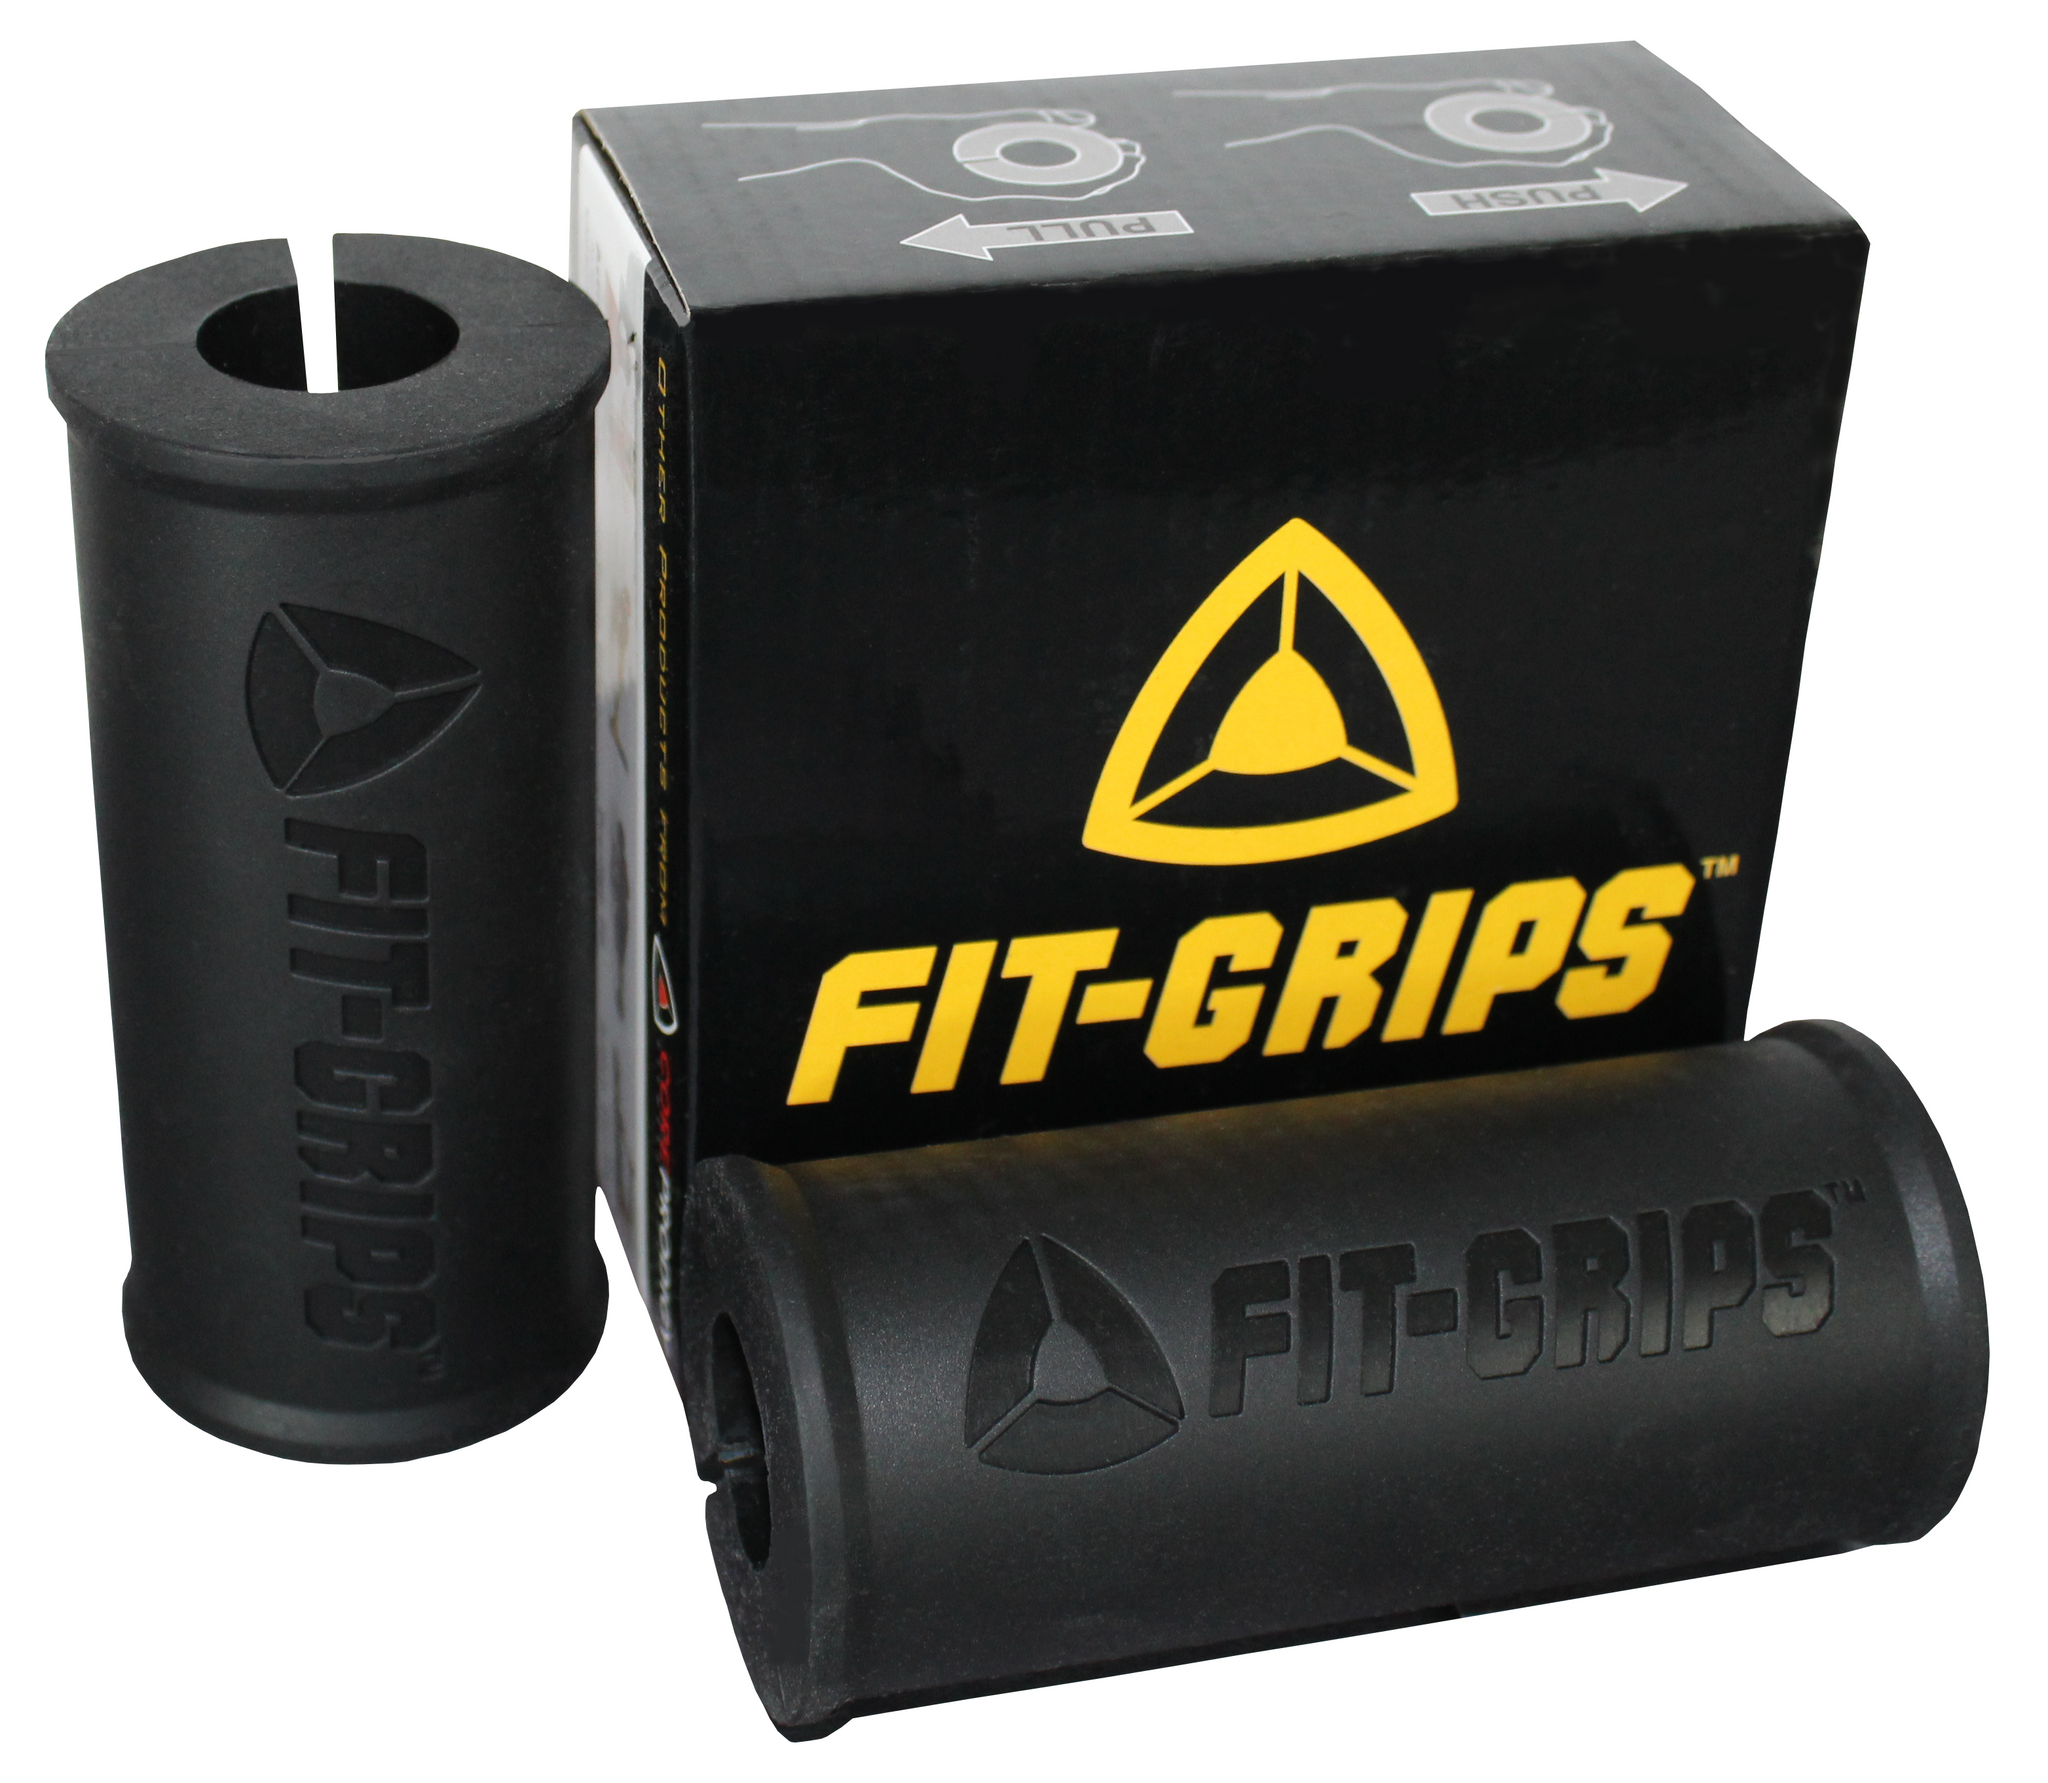 Core Prodigy Fit Grips Thick Bar Bodybuilding Training